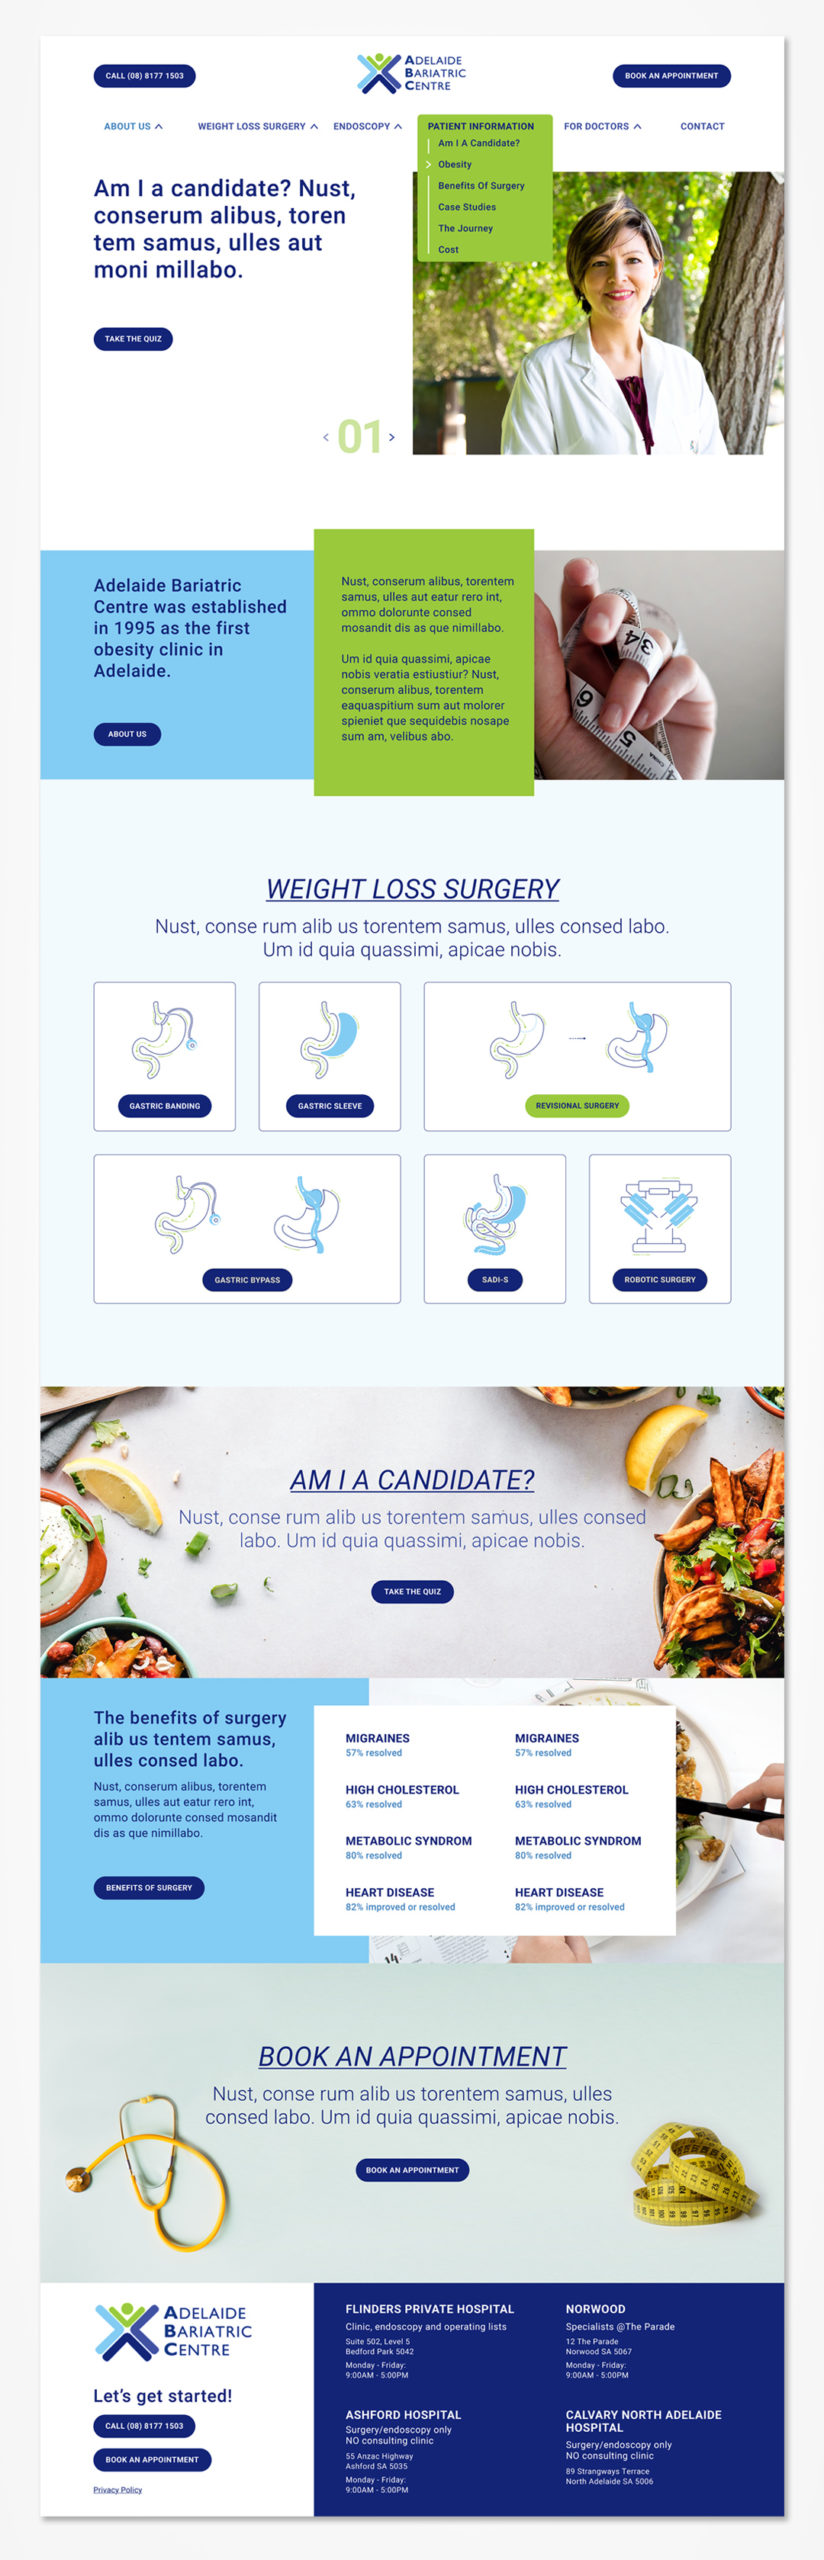 Adelaide Bariatric Centre website redesign, website wireframe and high fidelity prototype.